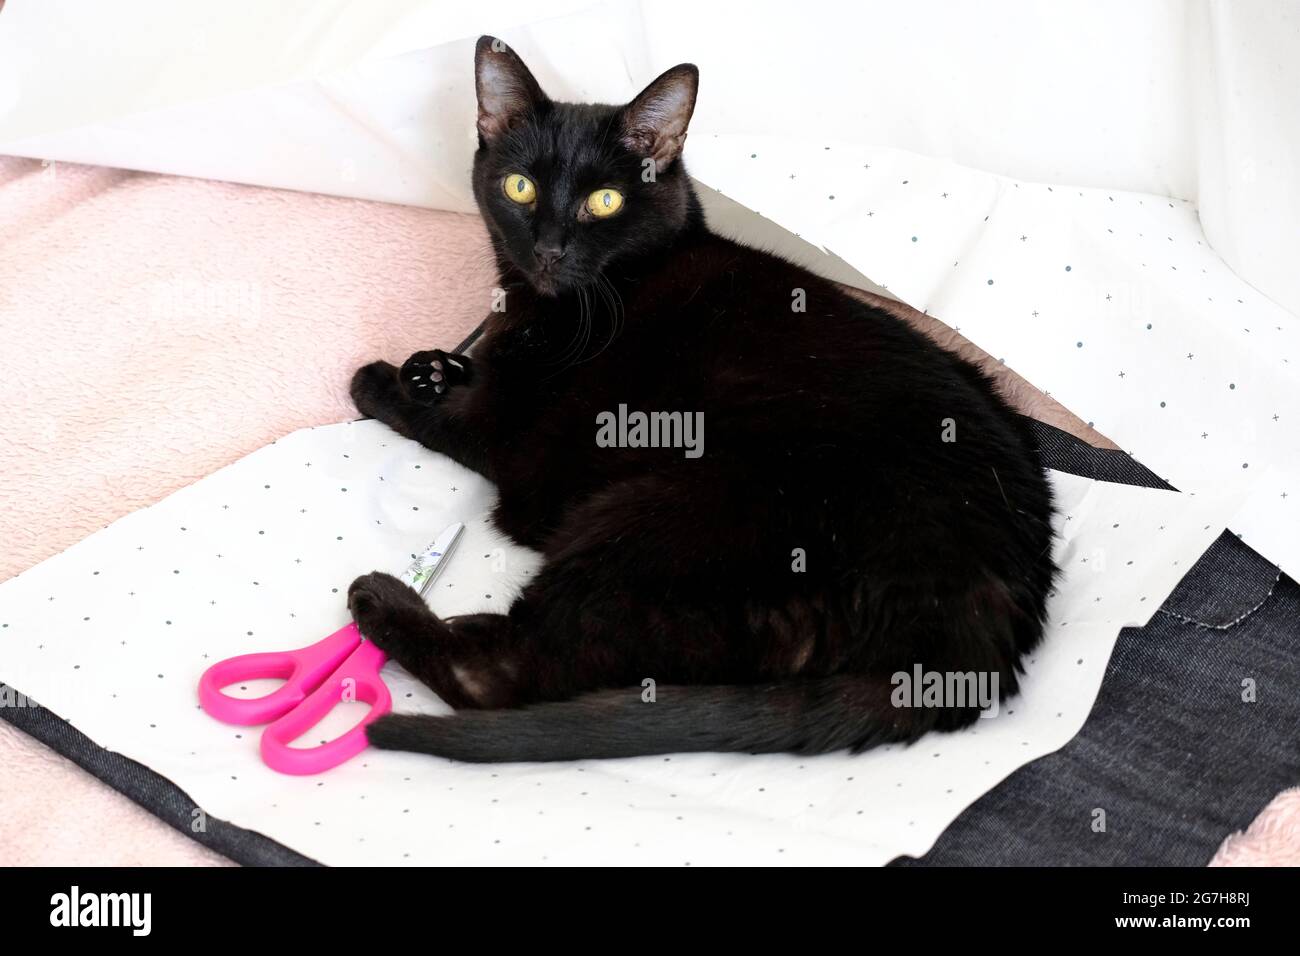 A single little pet black cat deliberately obstructing a sewing project Stock Photo